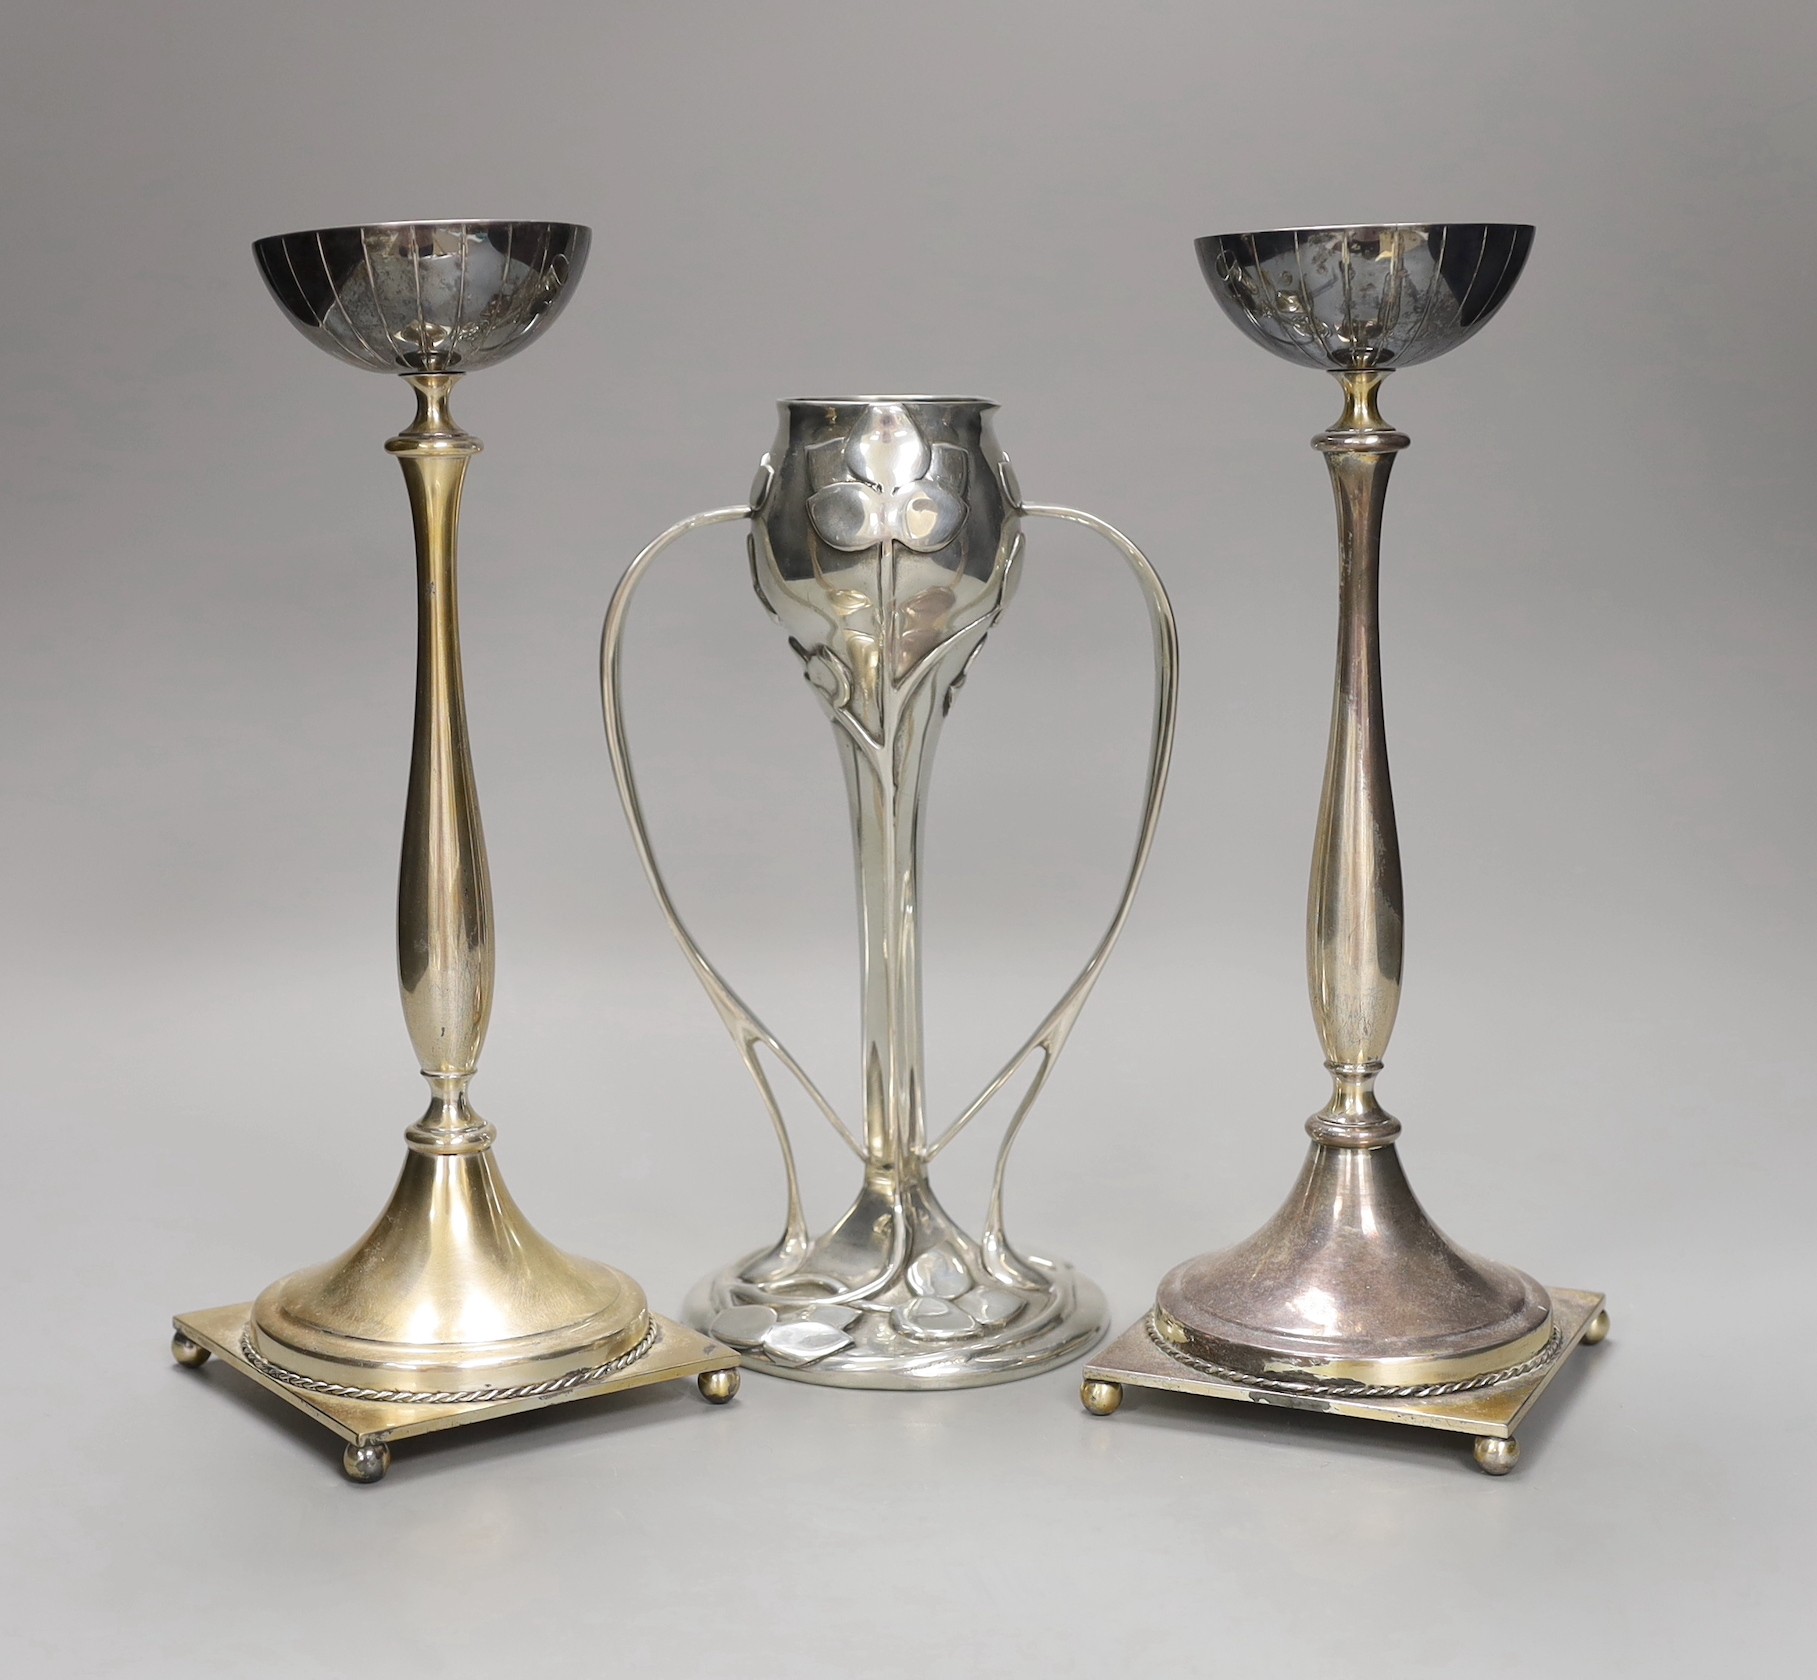 An Archibald Knox style pewter vase and two Swedish silver plated candlesticks, 26cm